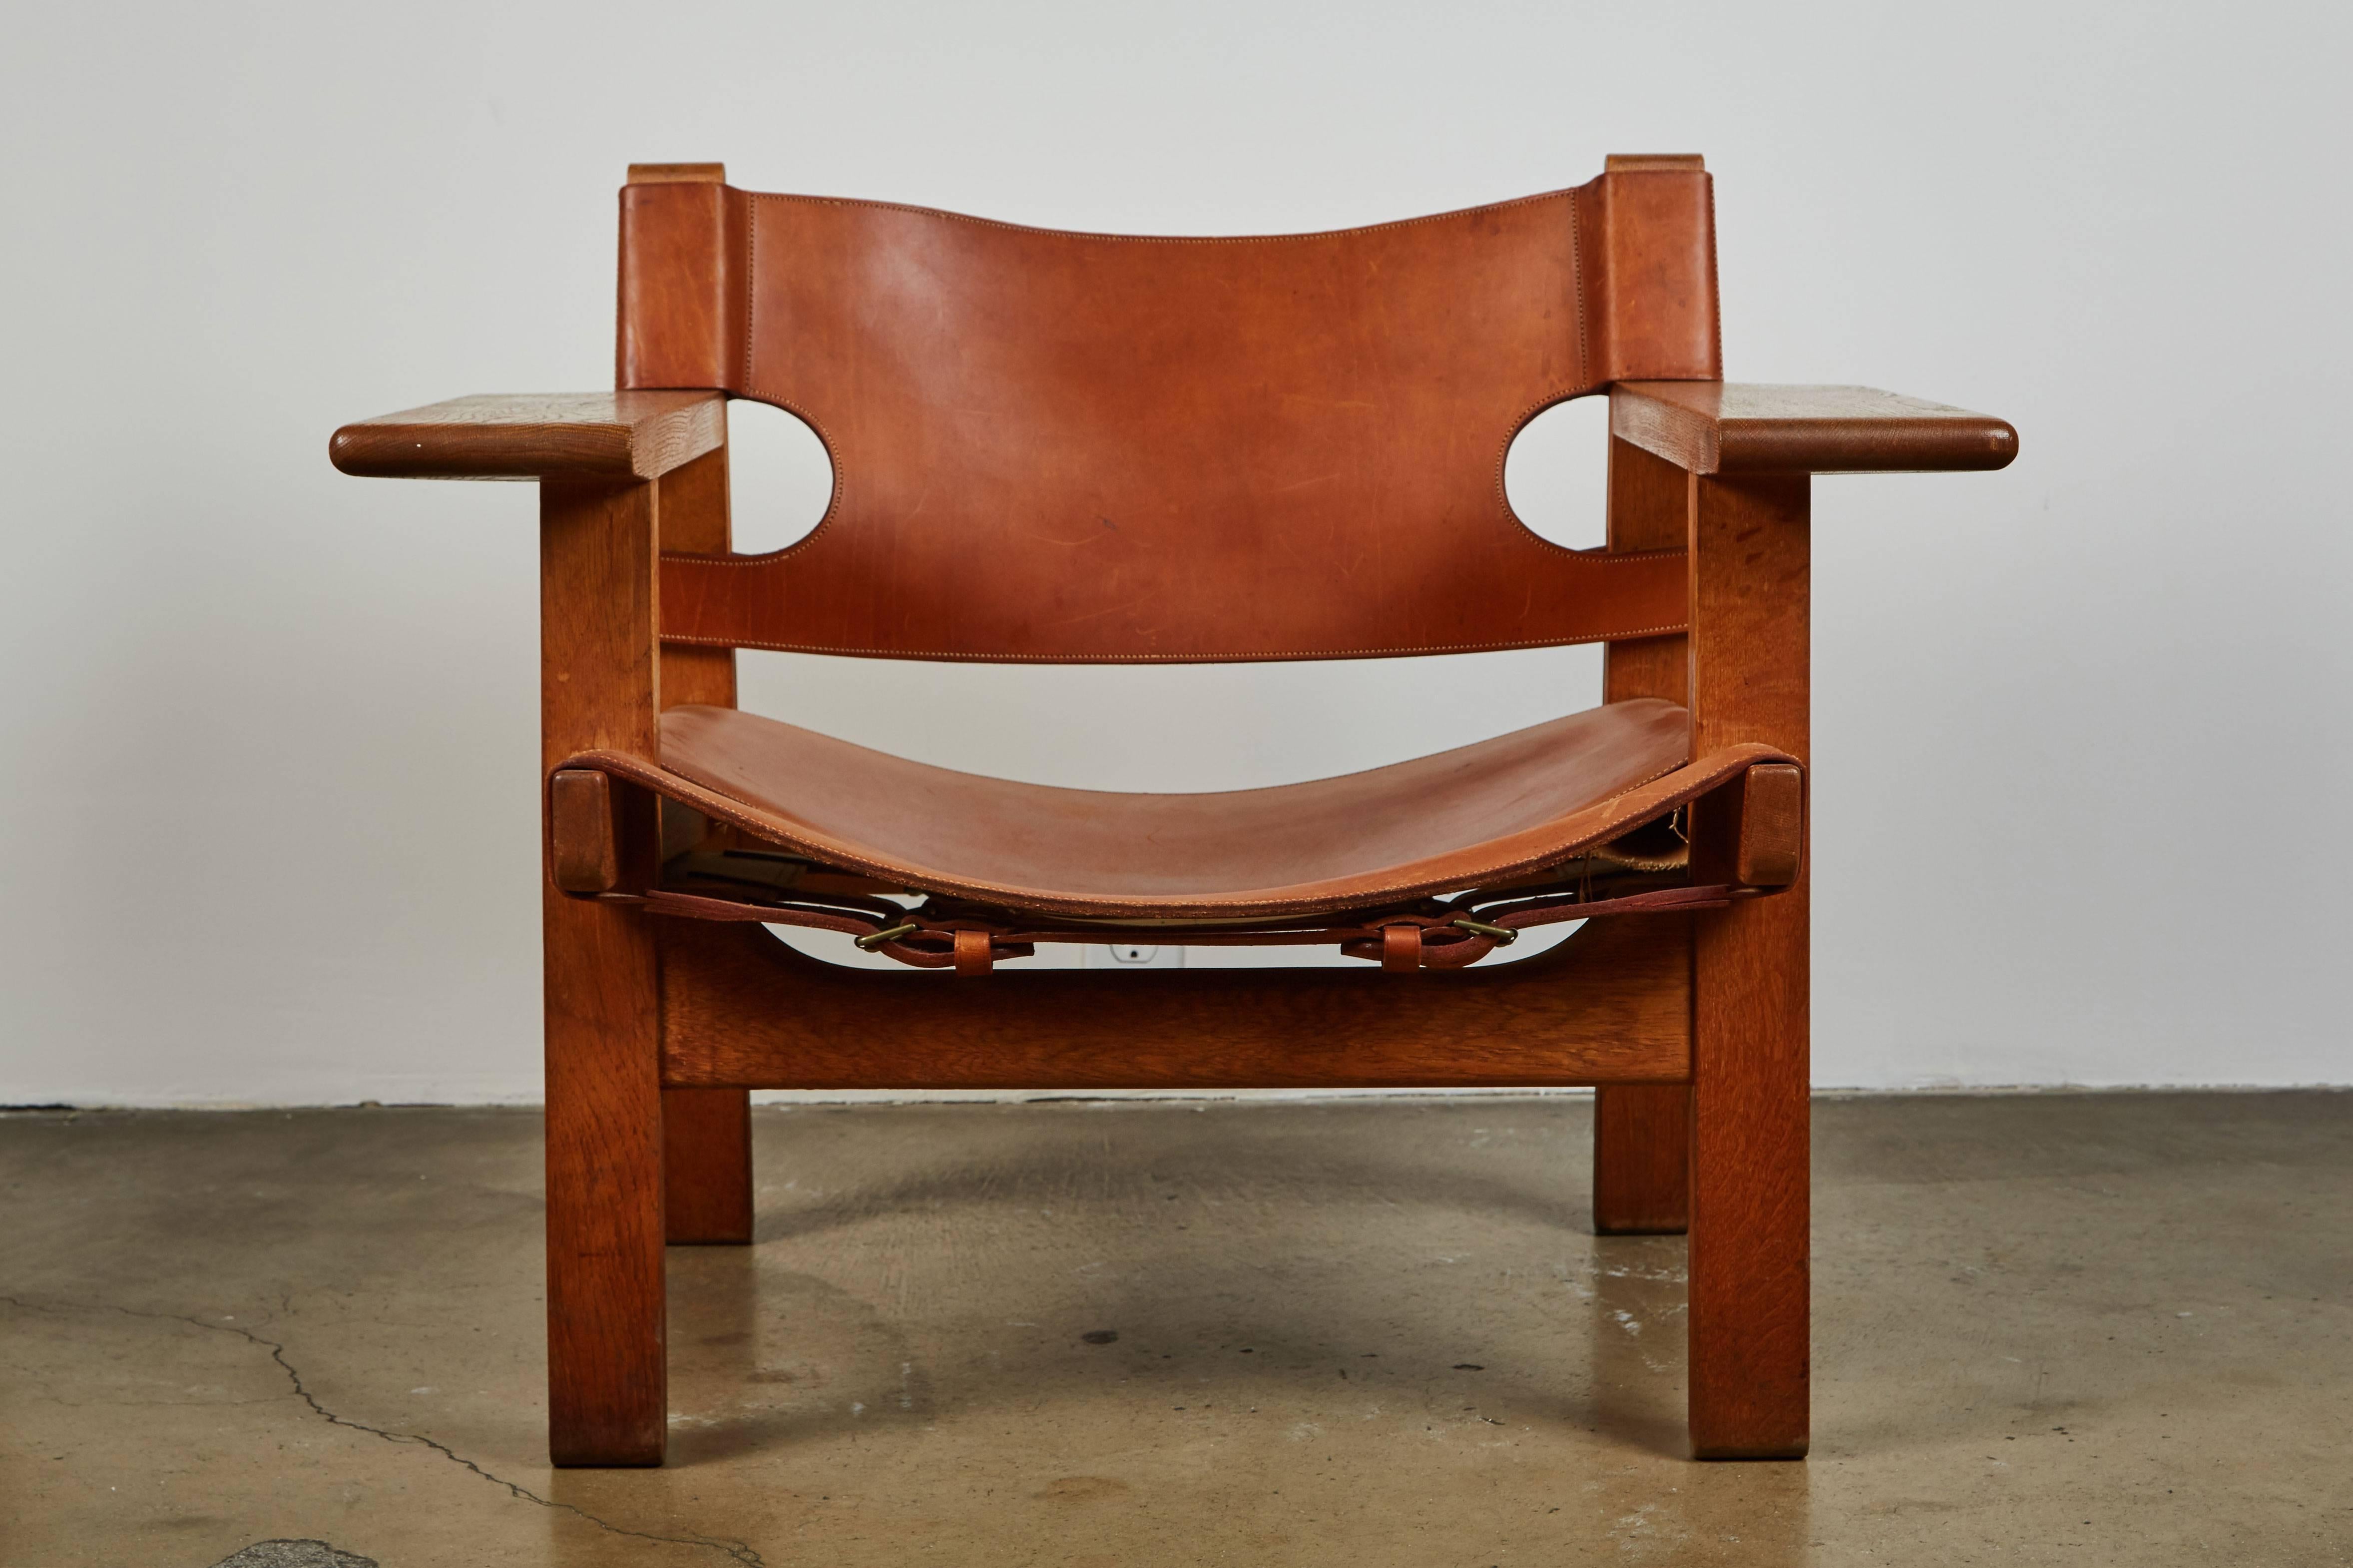 Iconic pair of early Spanish chairs by Børge Mogensen for Fredericia Furniture. Solid oak and beautiful patinated cognac leather. Made in Denmark, circa 1958.